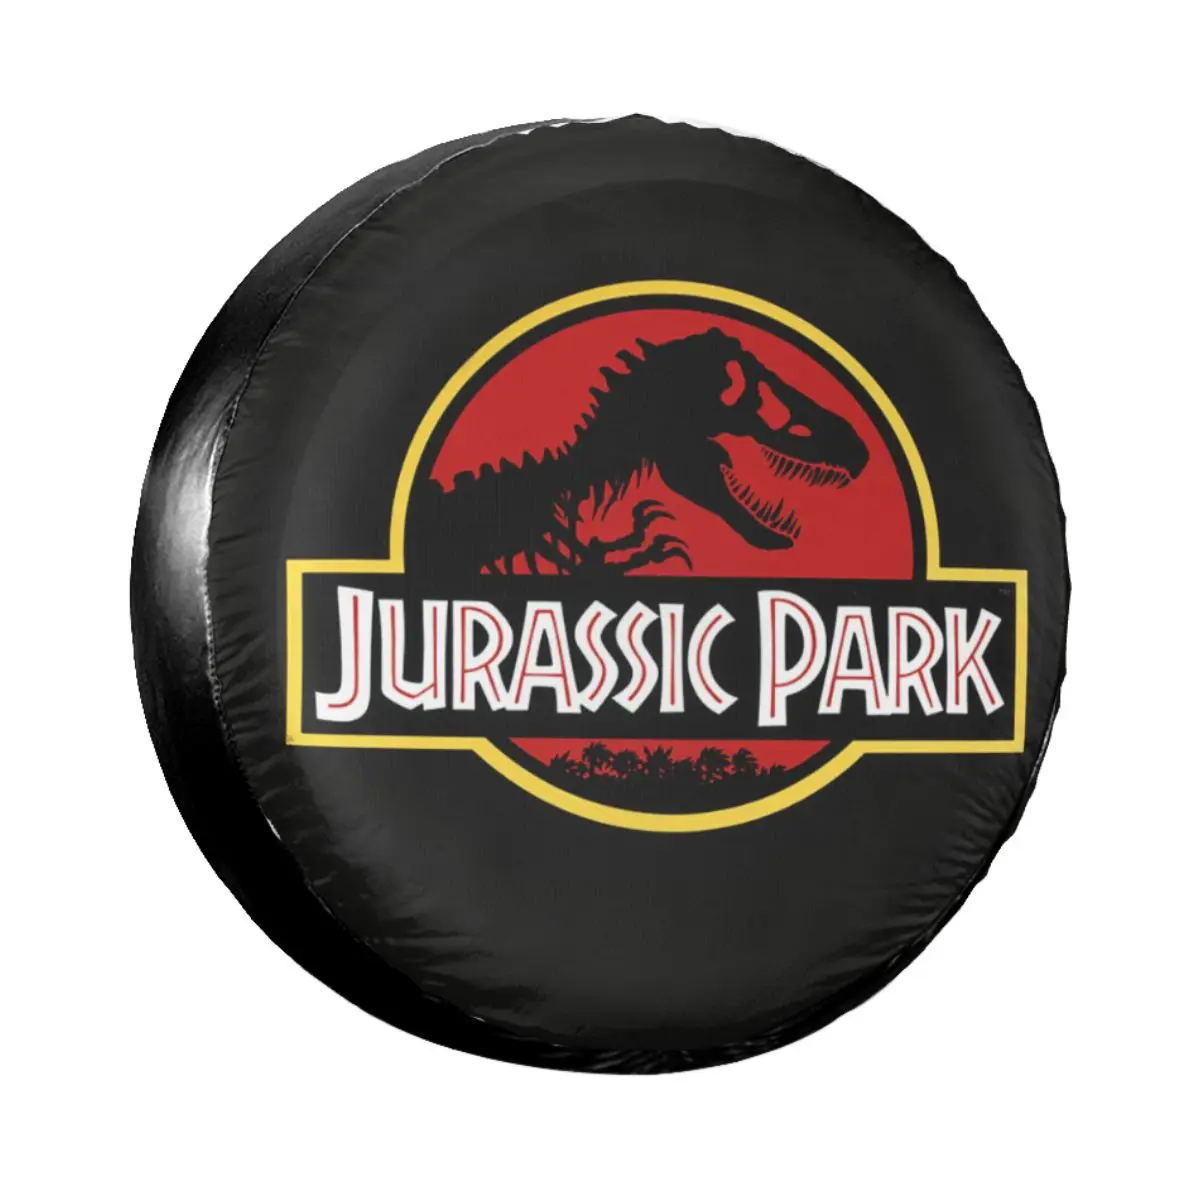 New Century Jurassic Park Sun Protector Tire Cover Waterproof Tire Cover Tire Spare Cover Suitable for Trucks Trailers Suvs Jeep and Many Vehicles 14-17 in 